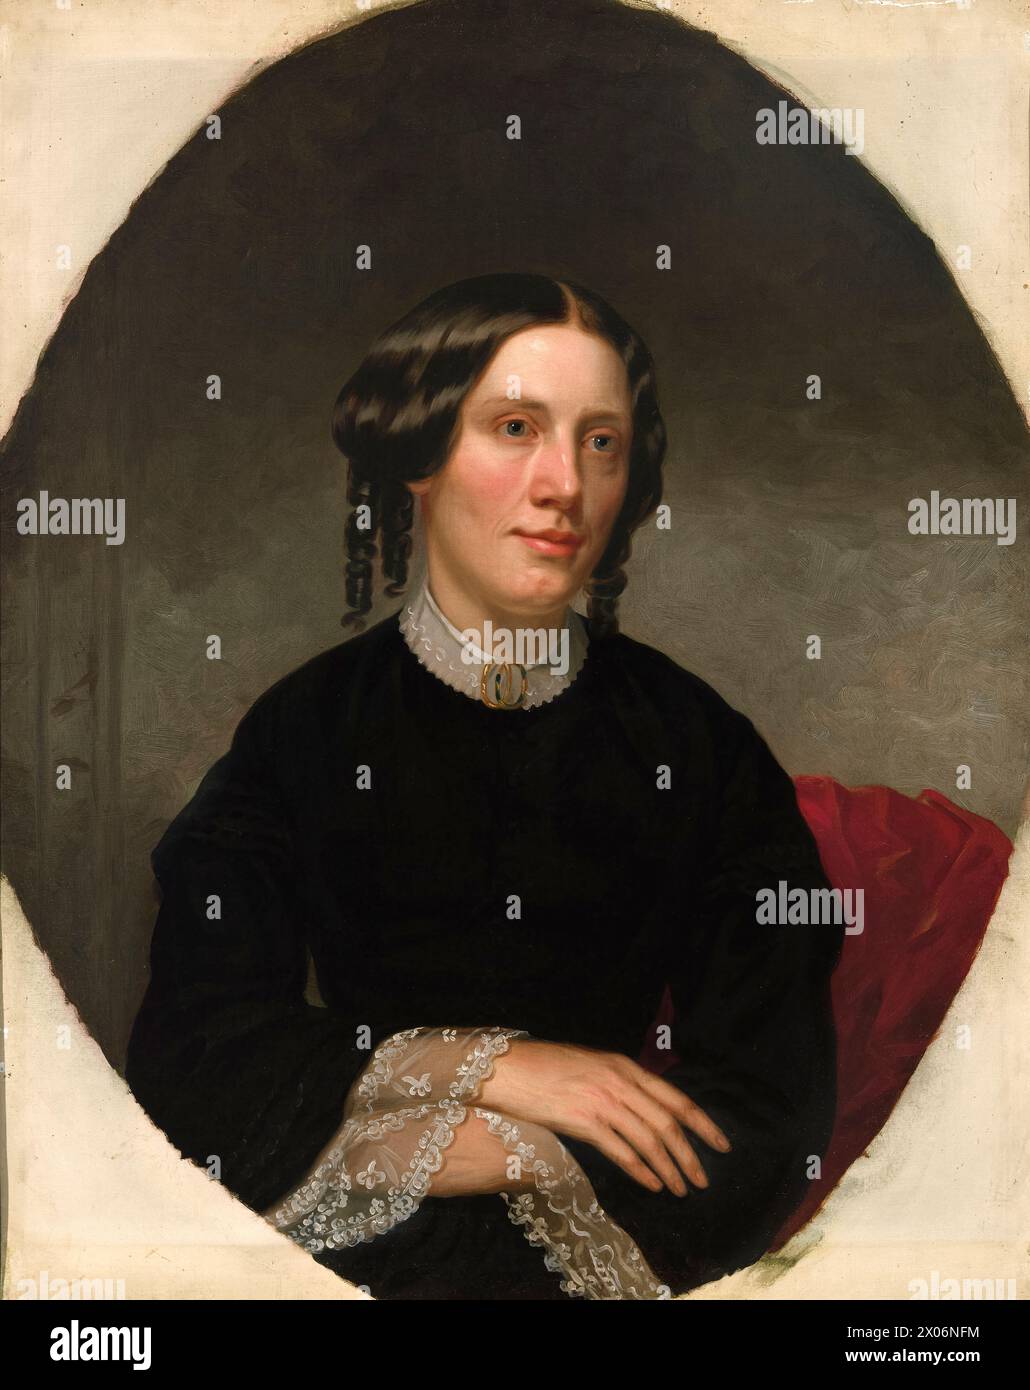 Portrait of Harriet Beecher Stowe (1811-1896) by American artist Alanson Fisher (1807-1884) painted in 1853. This portrait was commissioned a year after the publication of Stowe’s bestselling novel 'Uncle Tom's Cabin’ that did much to progress the abolitionist cause in 1850s. Stock Photo